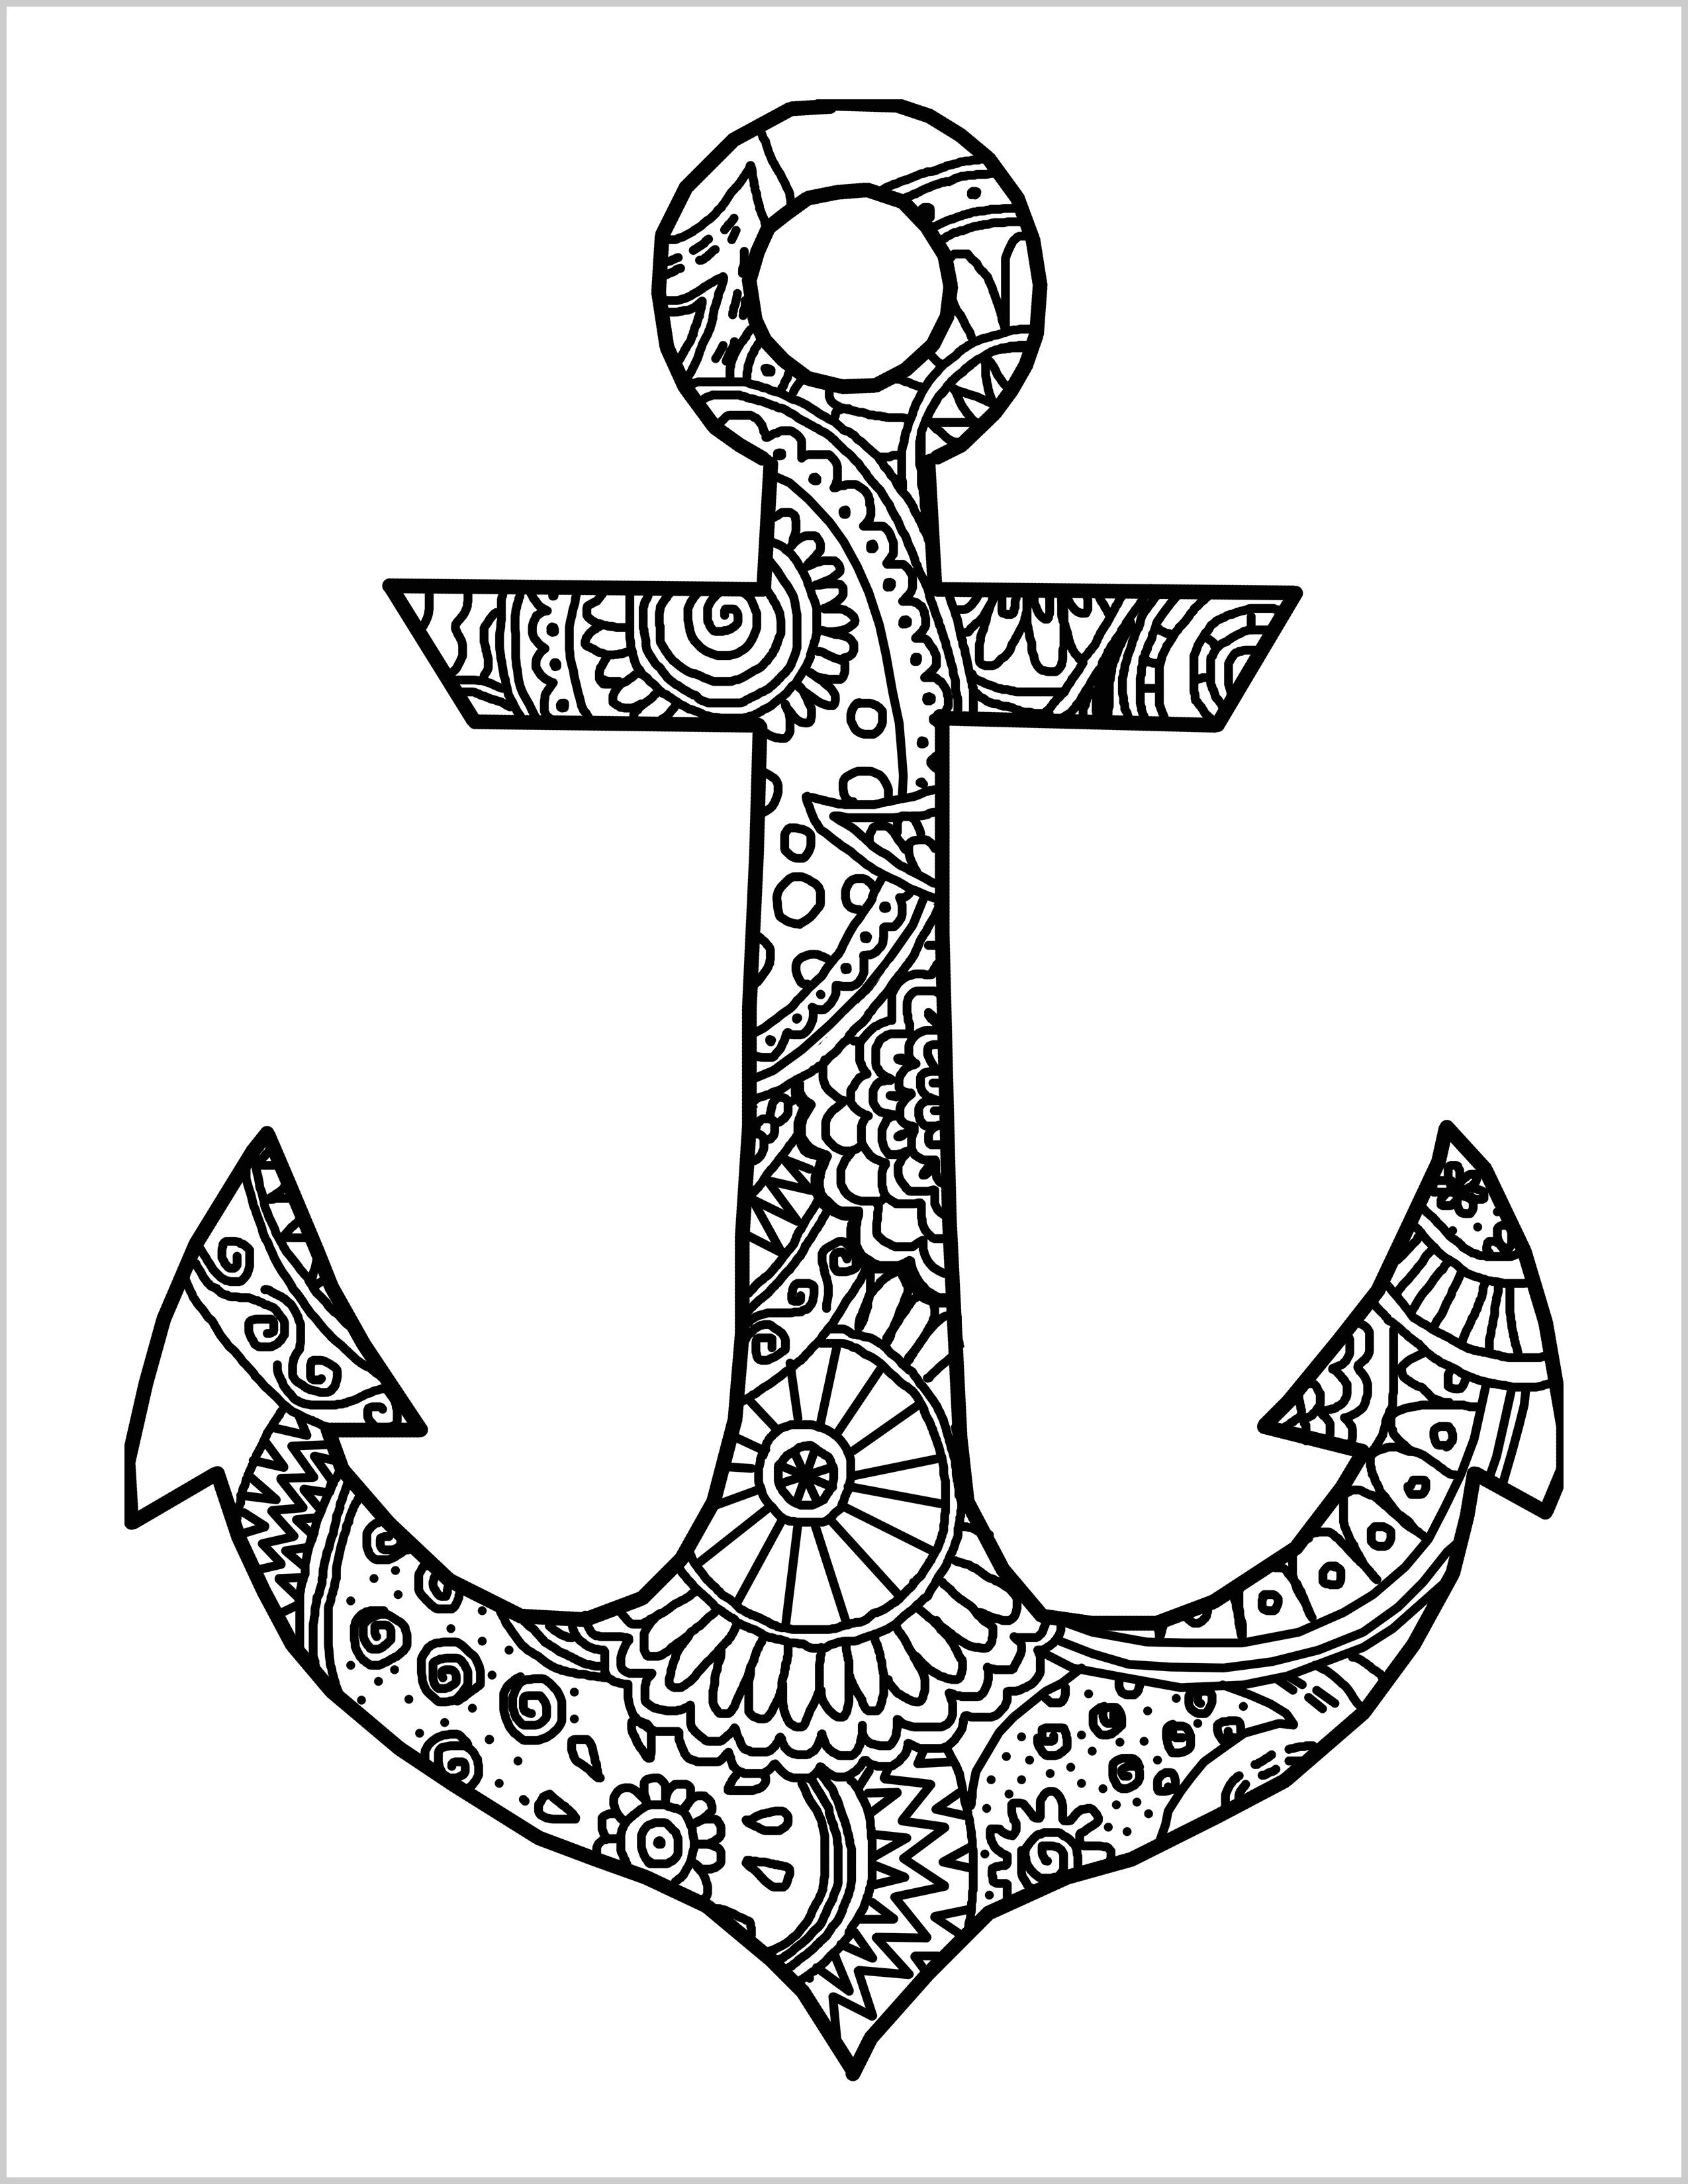 Anchor Coloring Pages Free at GetColorings.com | Free printable